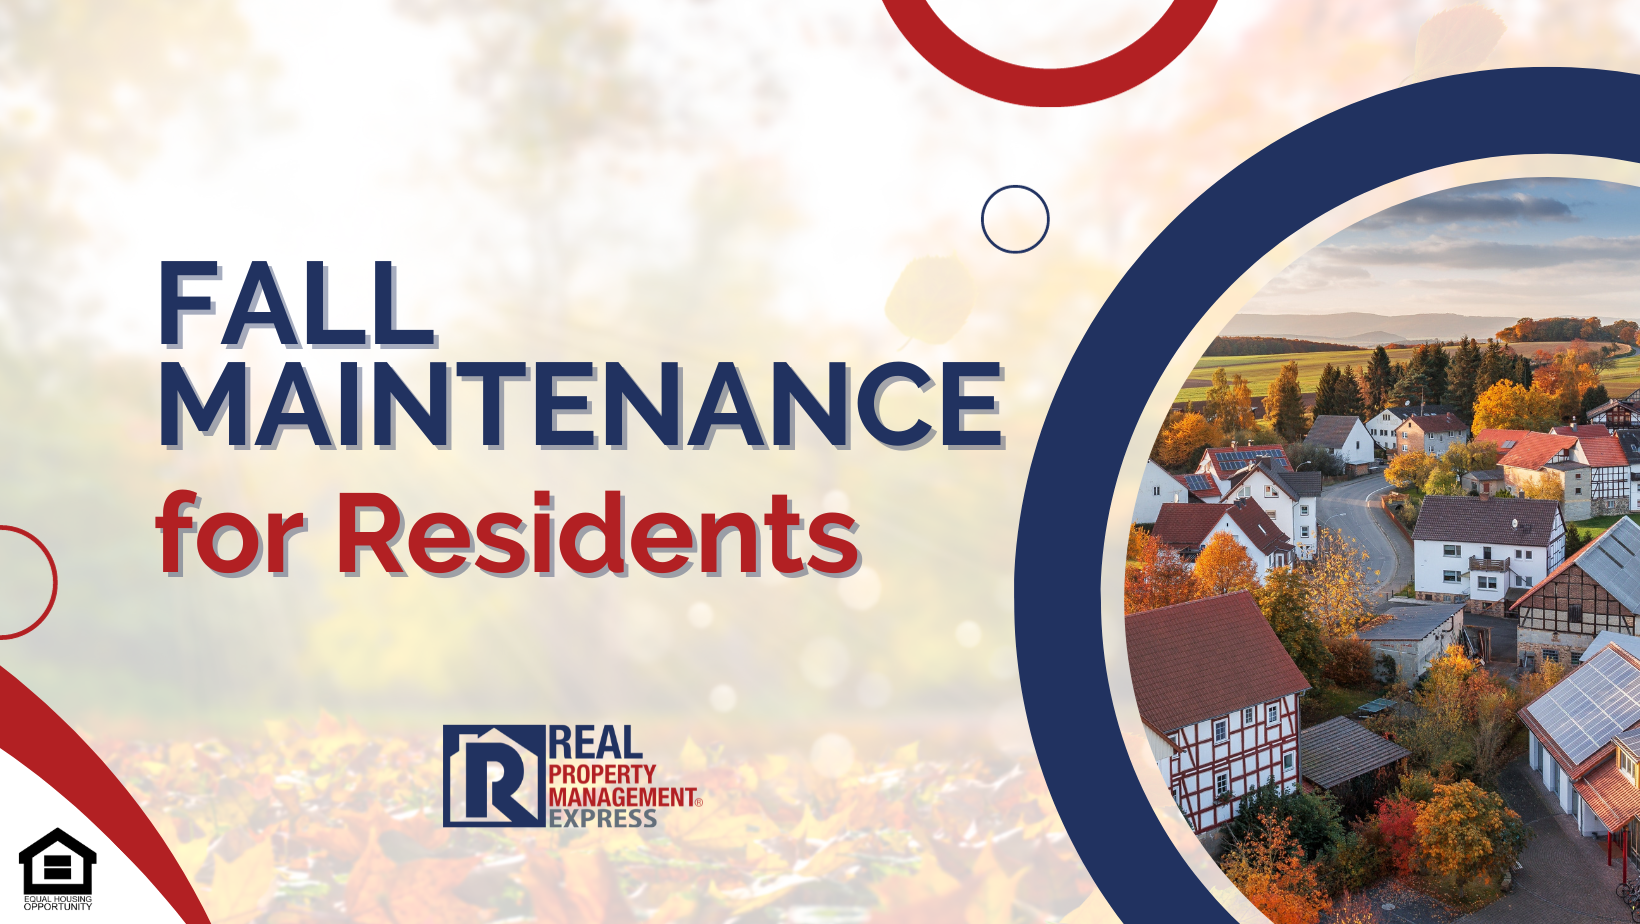 Fall Maintenance for Residents